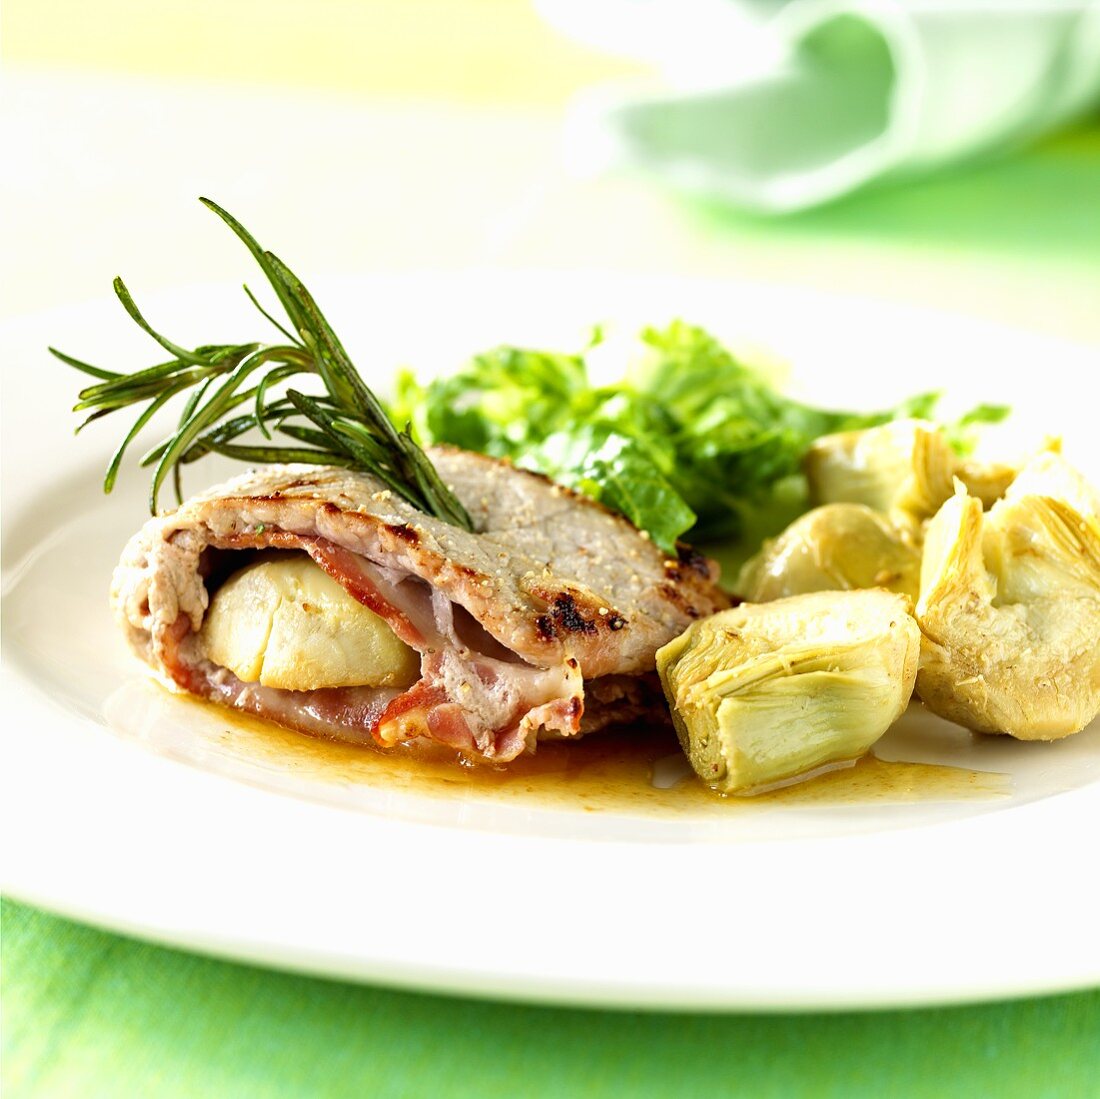 Bacon-stuffed veal escalope with rosemary and artichokes